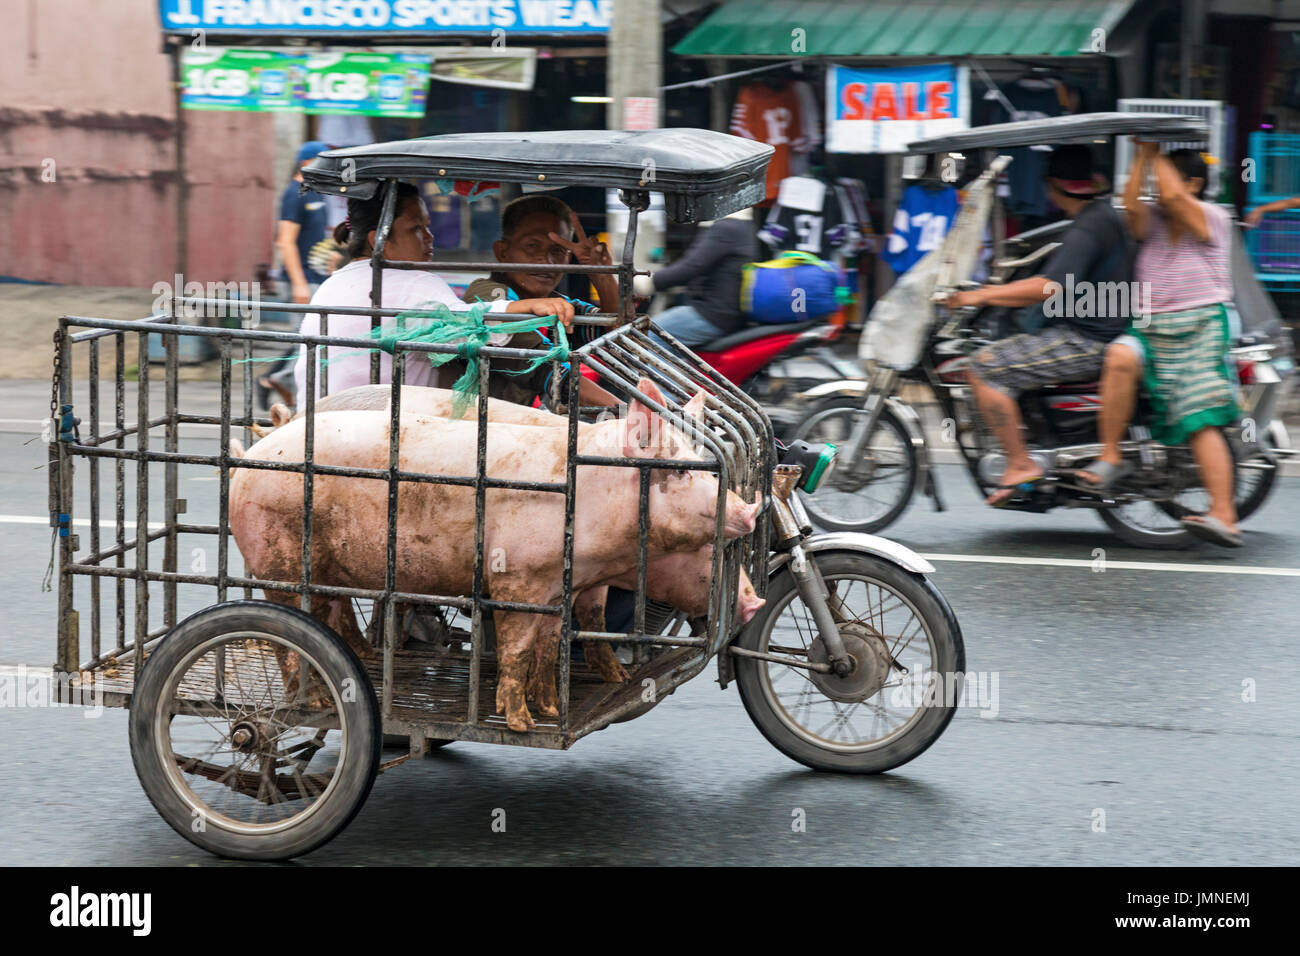 Tricycle taxi, with pig, in traffic, Angeles City, Pampanga, Philippines Stock Photo